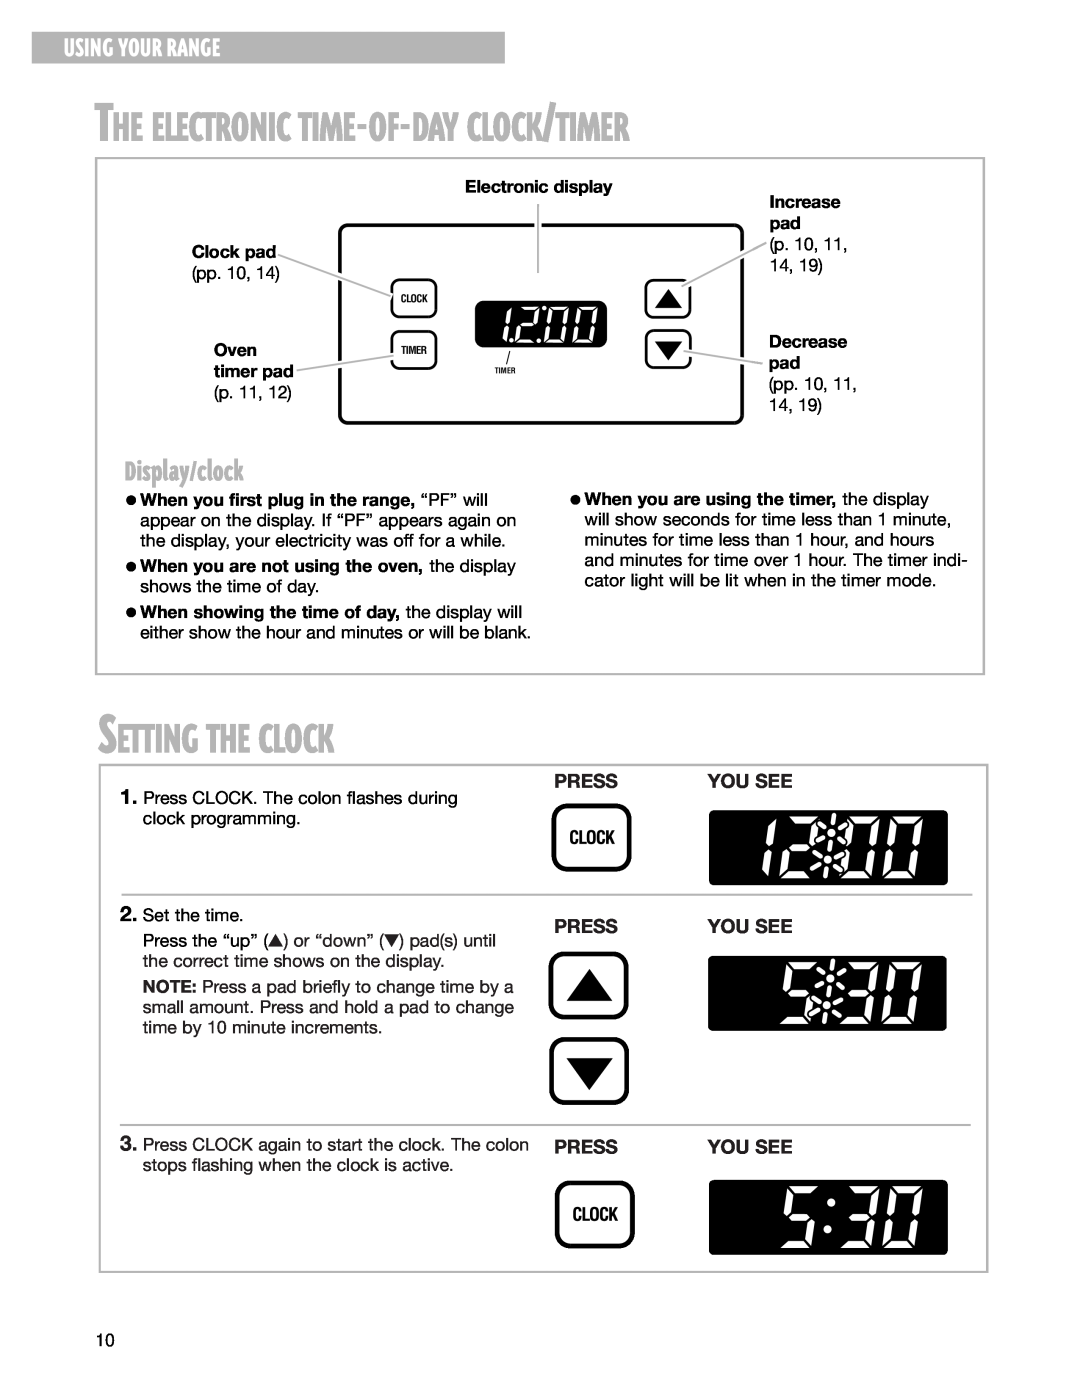 Whirlpool CGS365H Setting The Clock, Display/clock, The Electronic Time-Of-Day Clock/Timer, Using Your Range, Press 